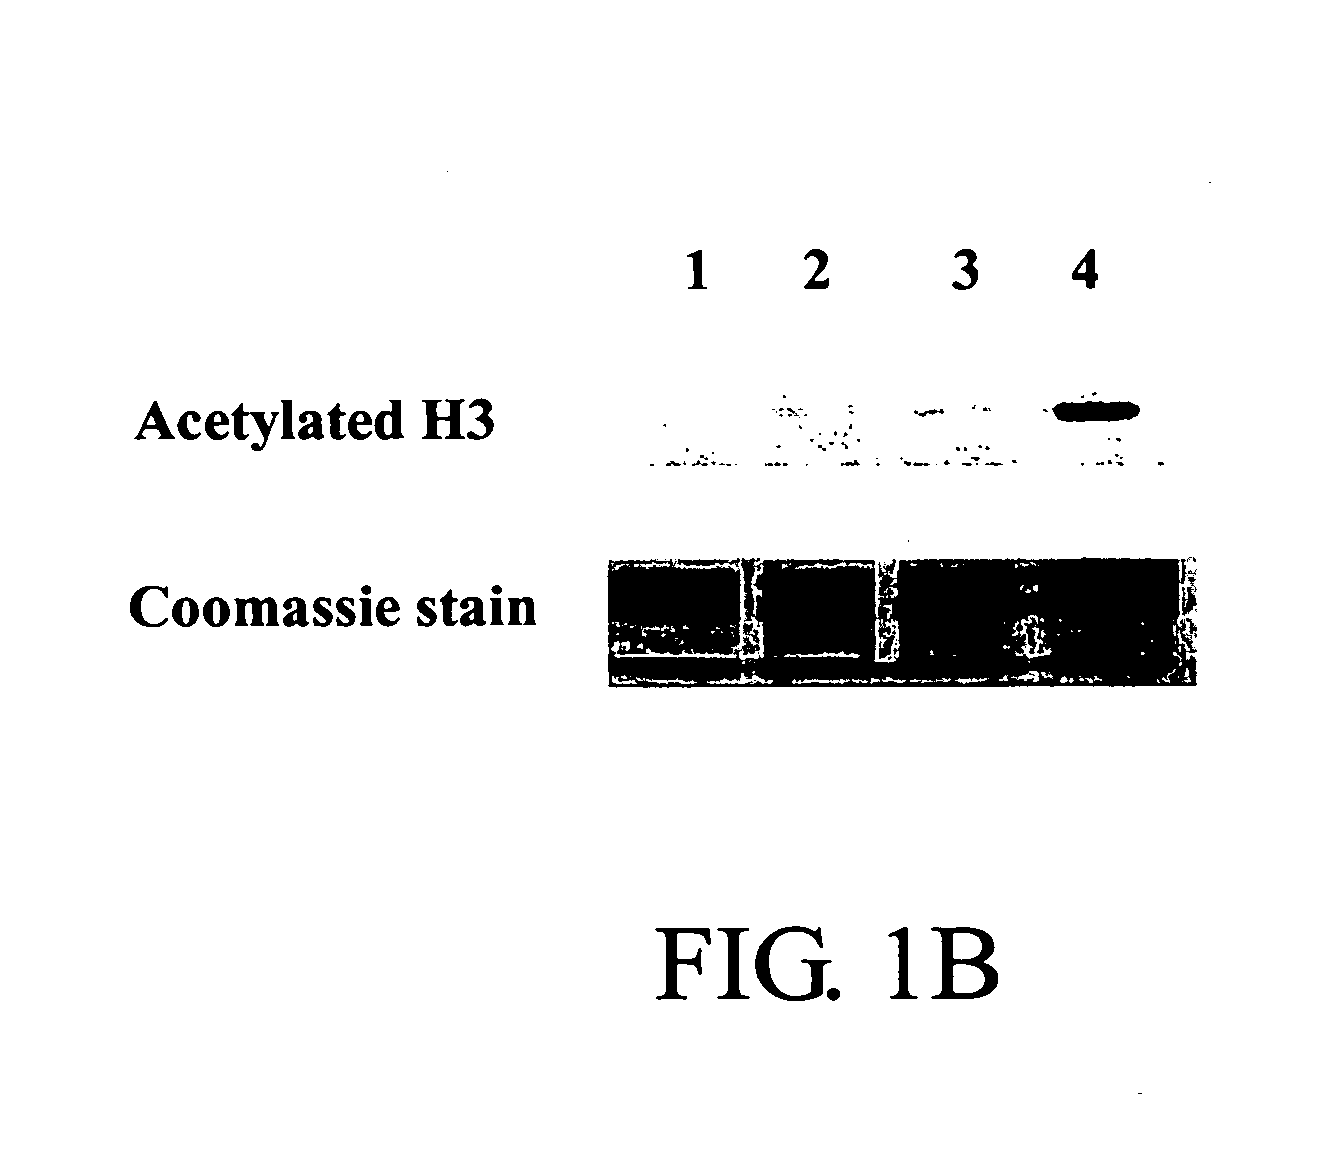 Histone hyperacetylating agents for promoting wound healing and preventing scar formation